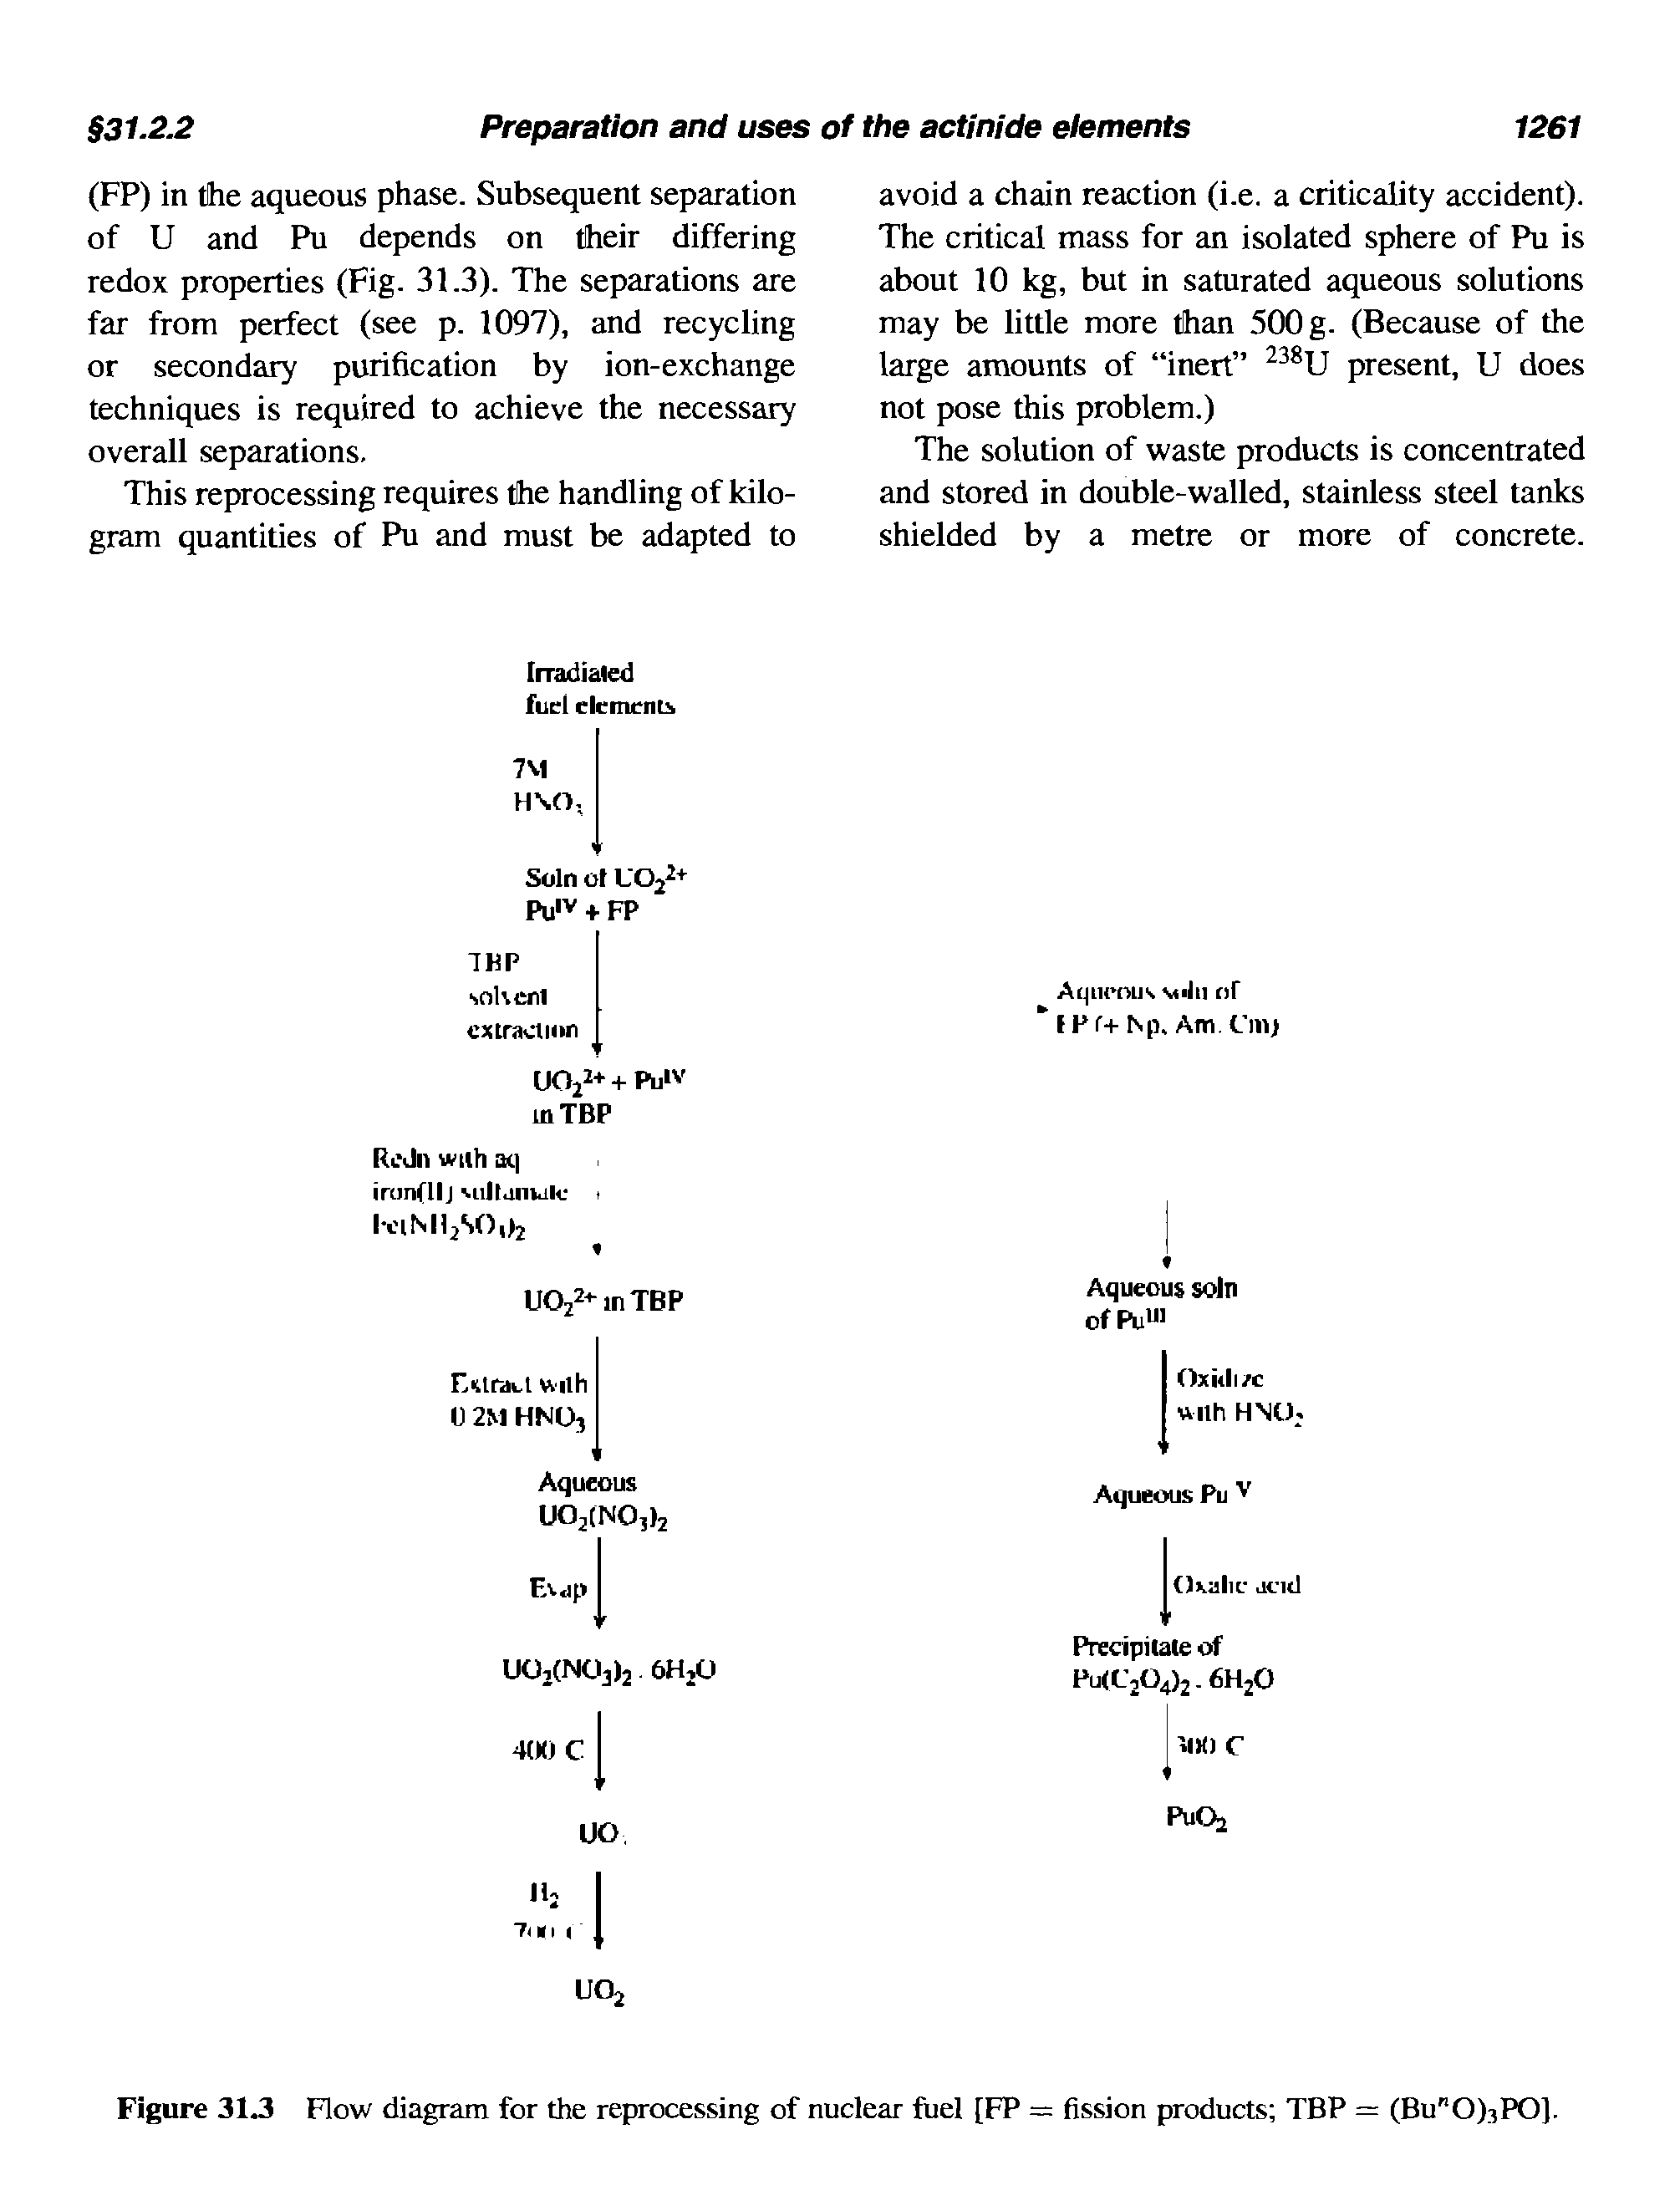 Figure 31.3 Flow diagram for the reprocessing of nuclear fuel [FP = fission products TBP = (Bu"0)3PO).